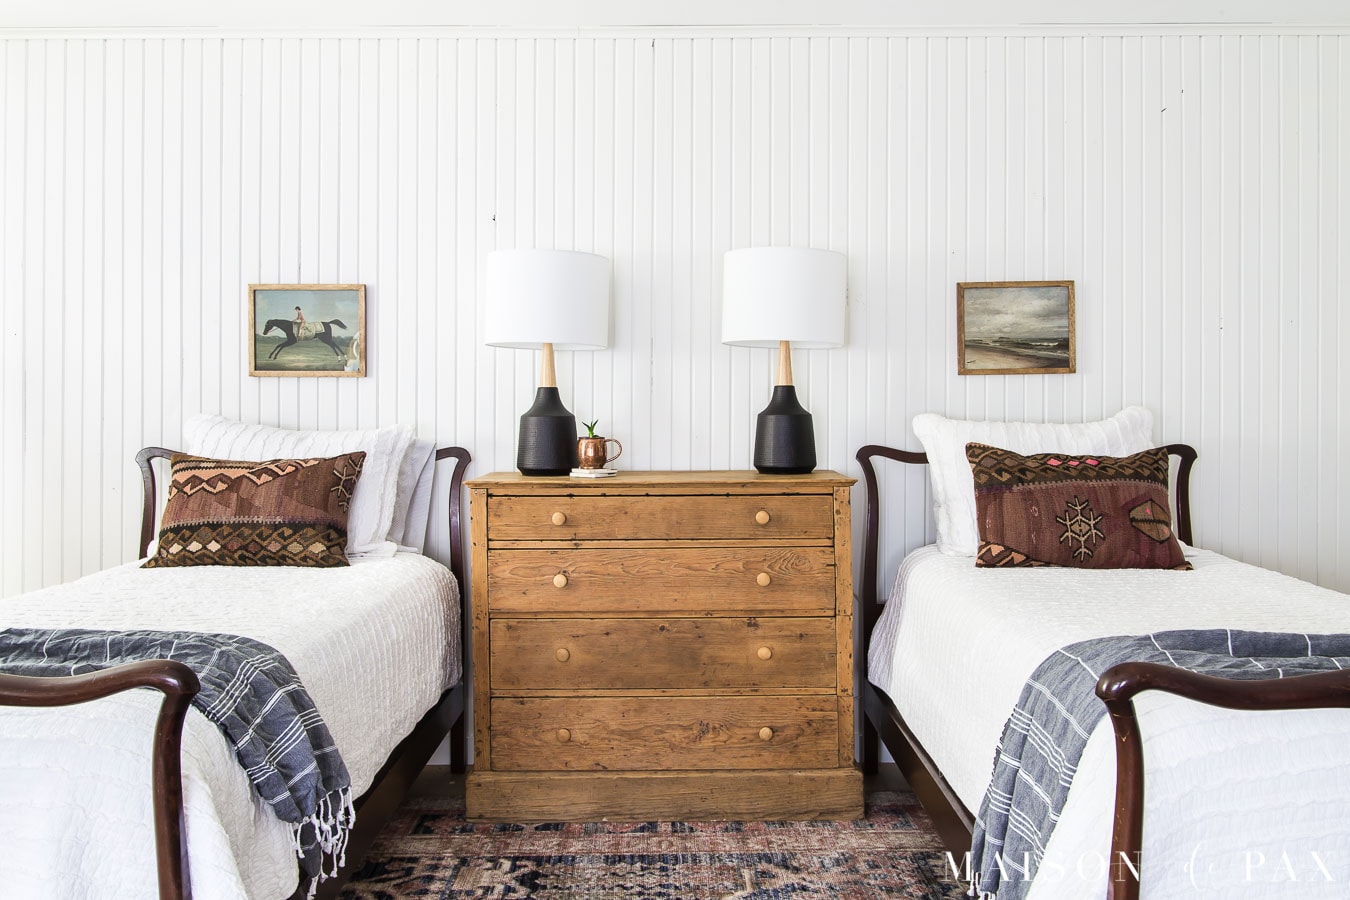 antique twin beds with modern lamps and rustic dresser | maison de pax